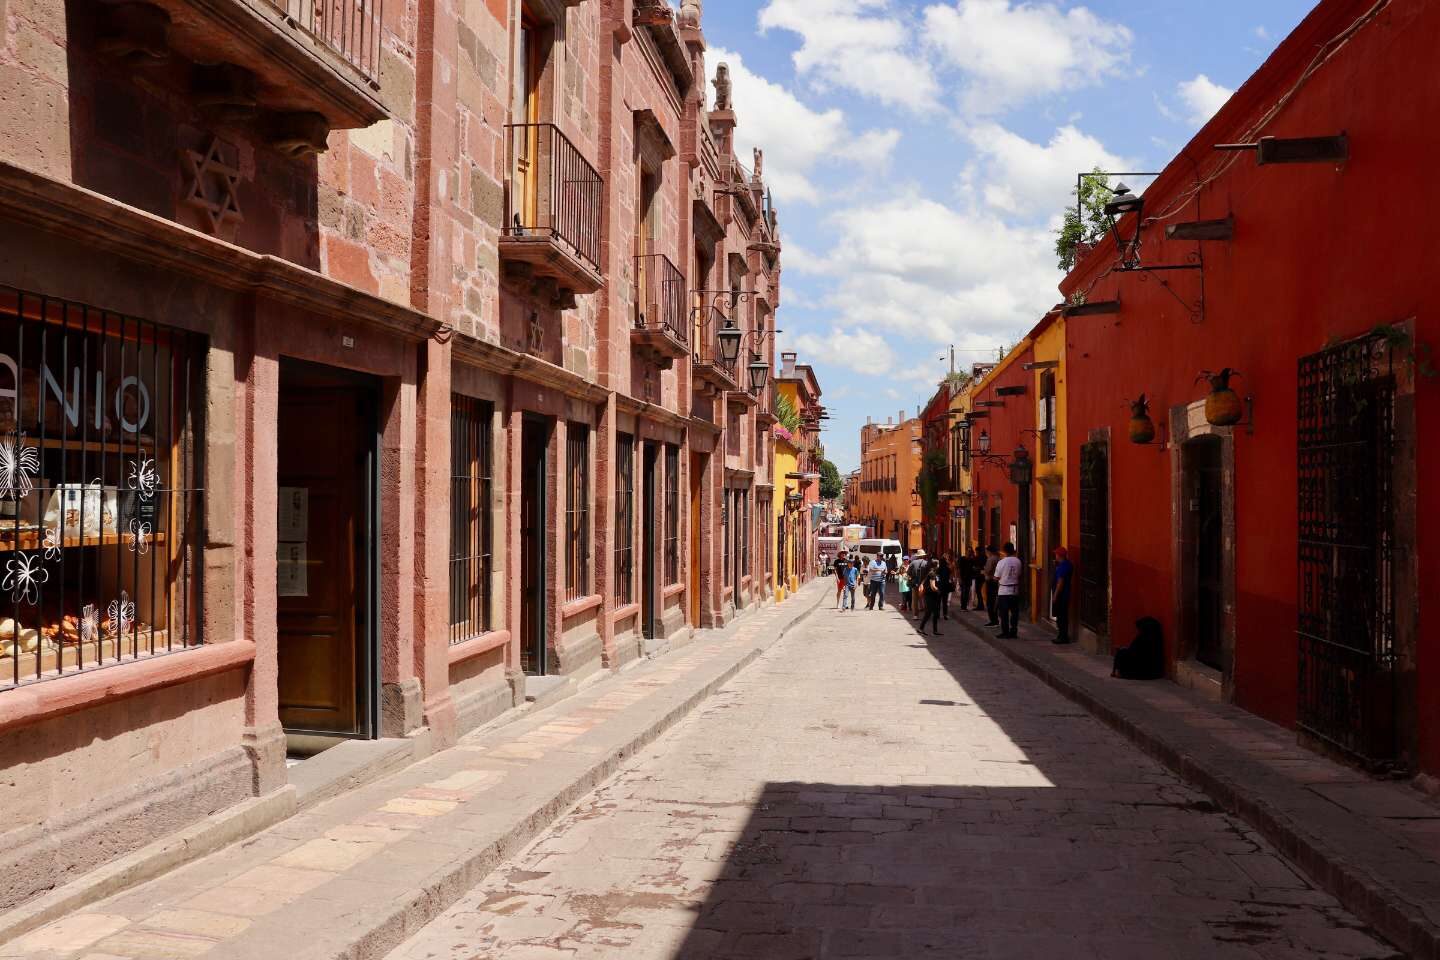 Landmarks to visit in Mexico